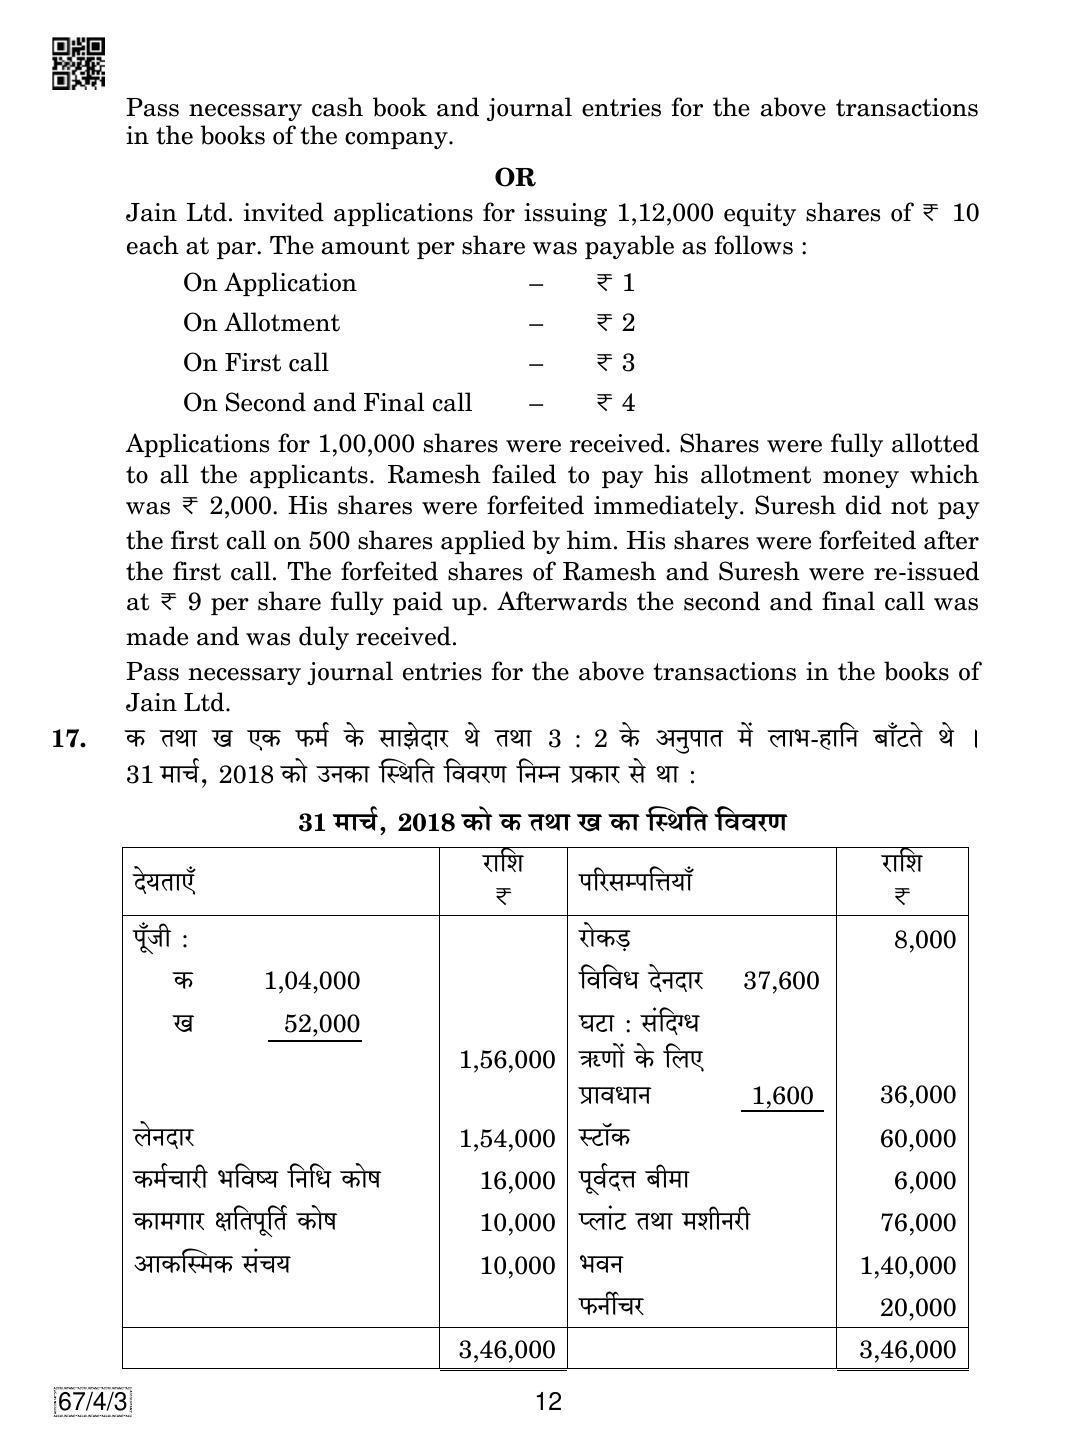 CBSE Class 12 67-4-3 Accountancy 2019 Question Paper - Page 12